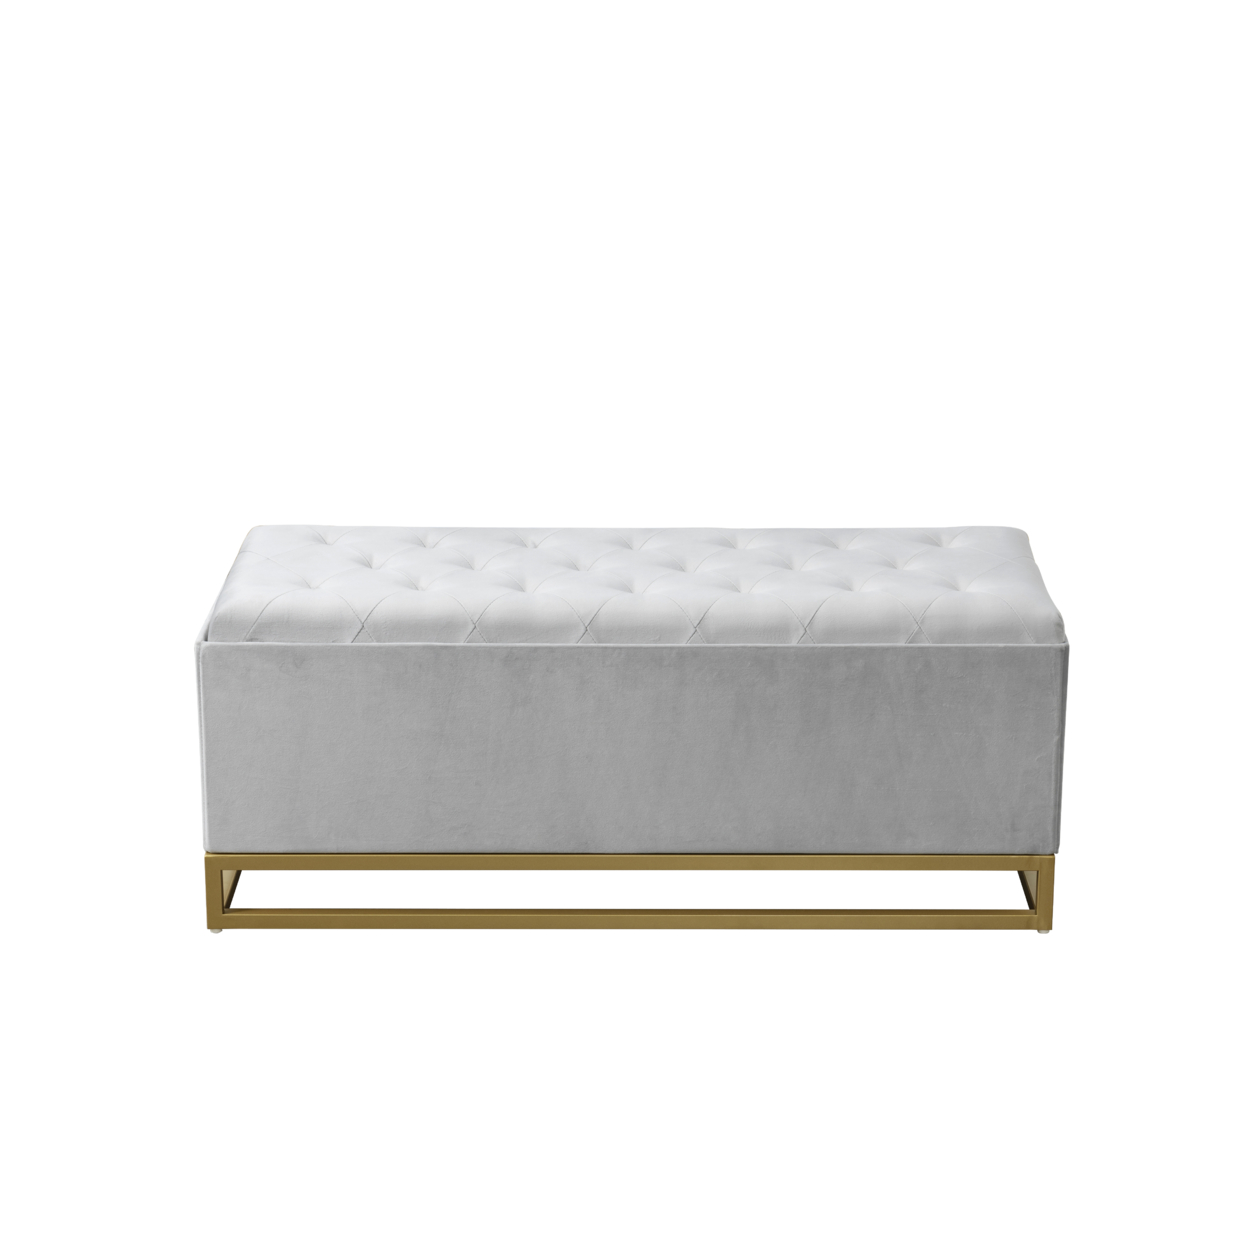 Iconic Home Kaili Storage Bench Velvet Upholstered Tufted Seat Gold Tone Metal Base With Discrete Interior Compartment - Blush